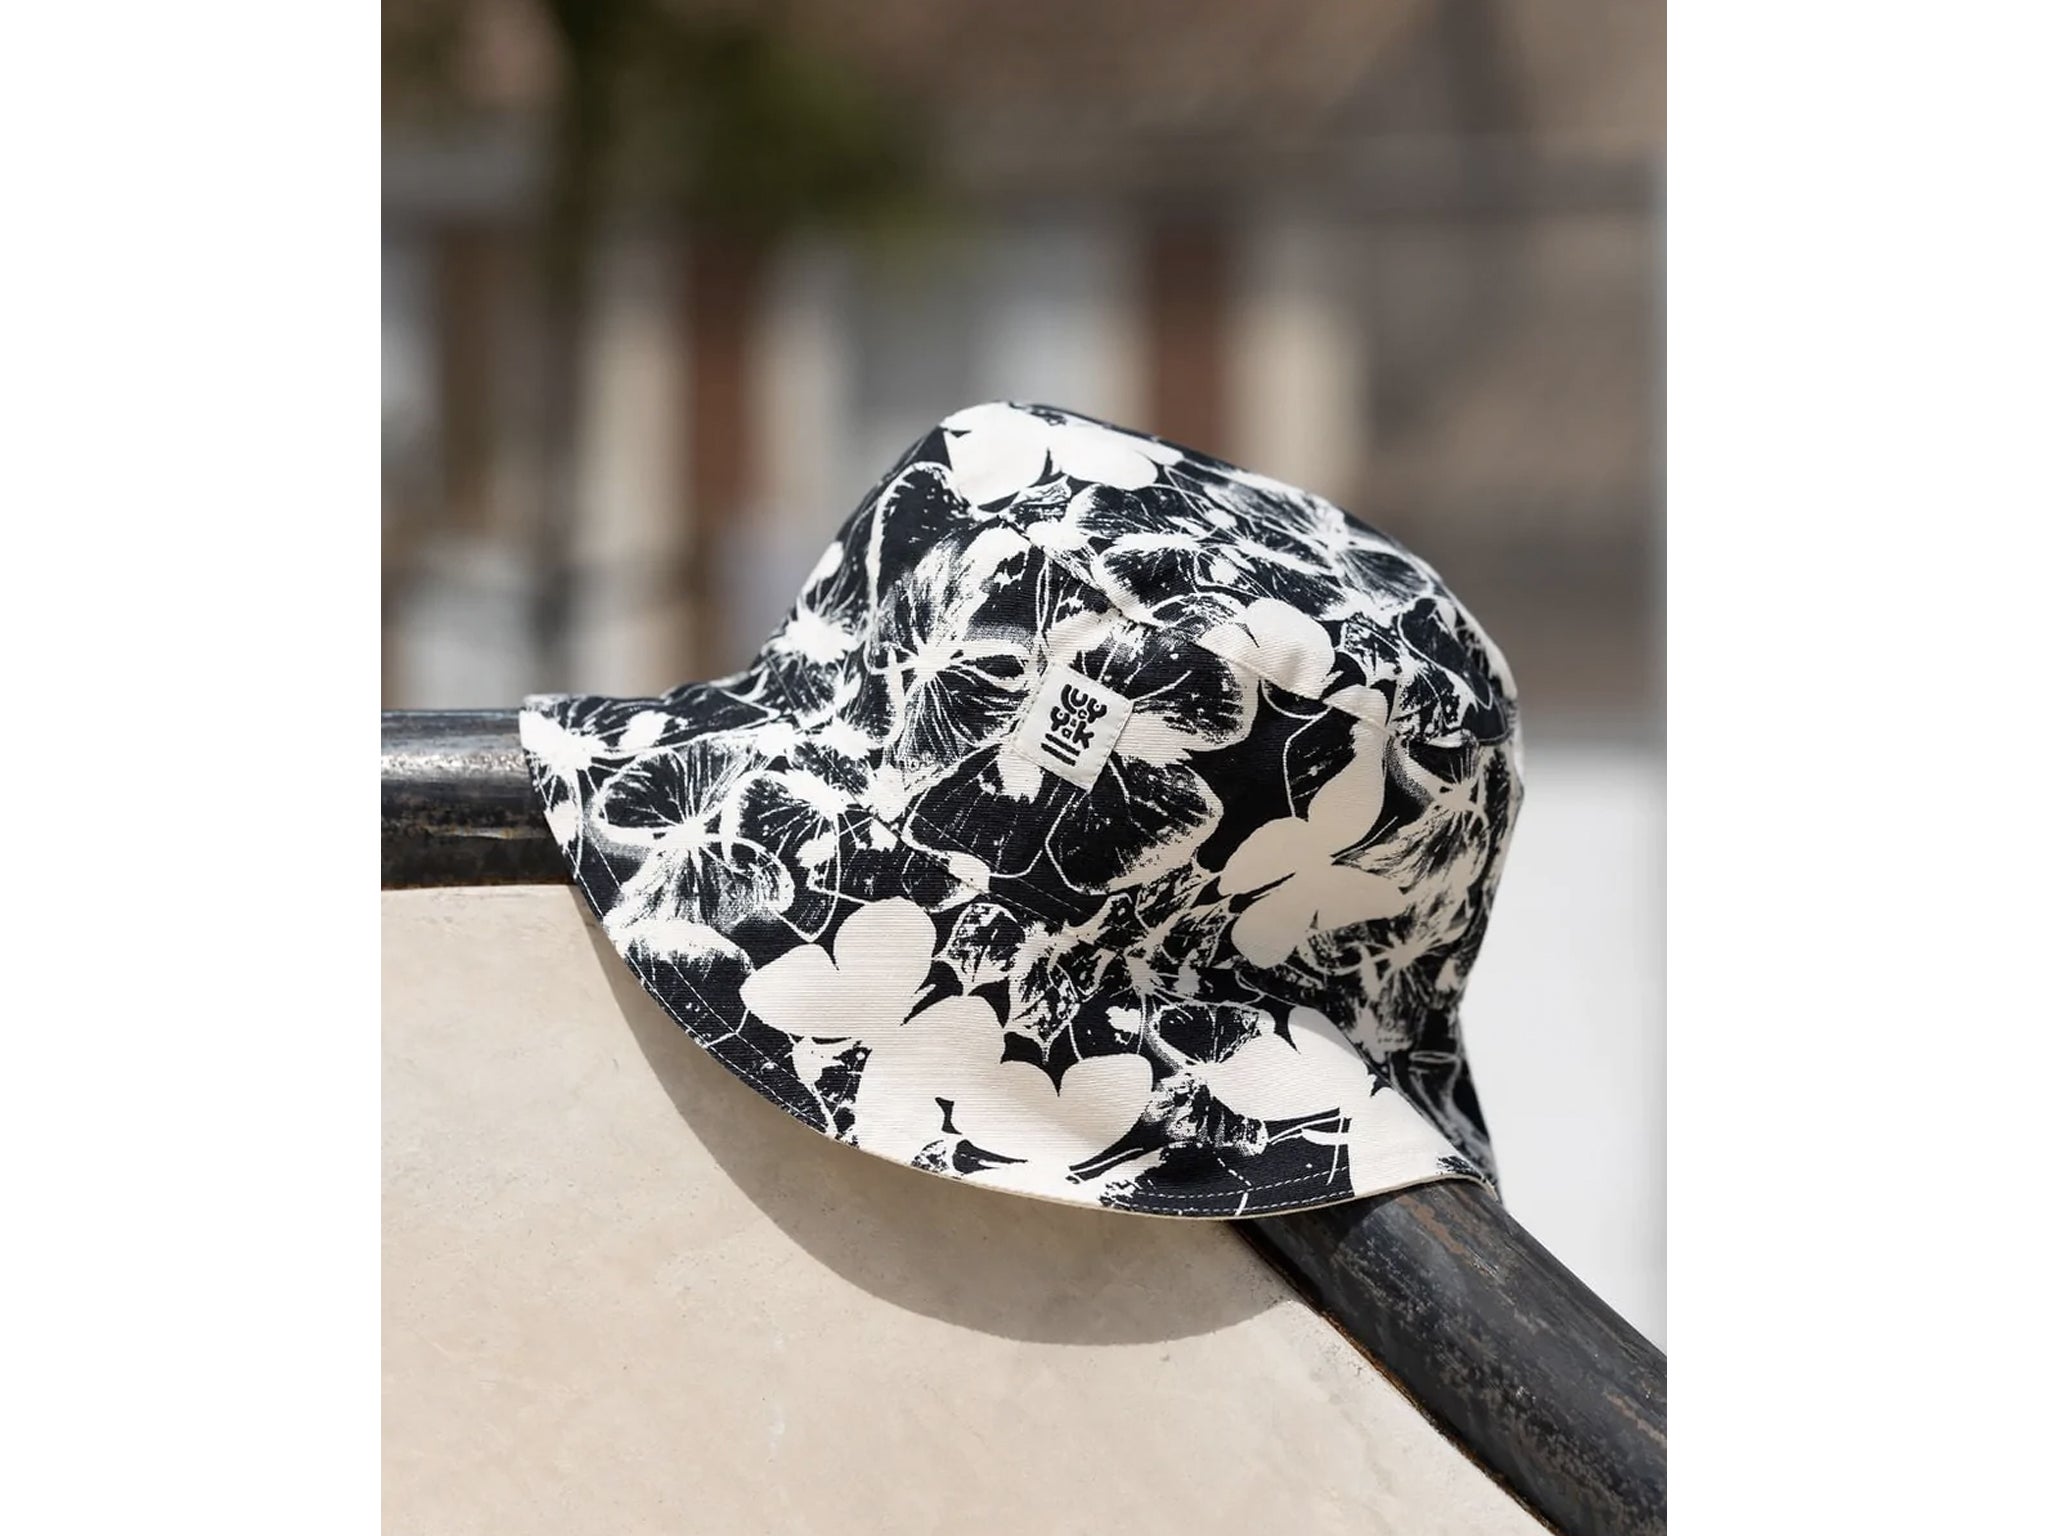 This reversable bucket hat is a must for summer festies